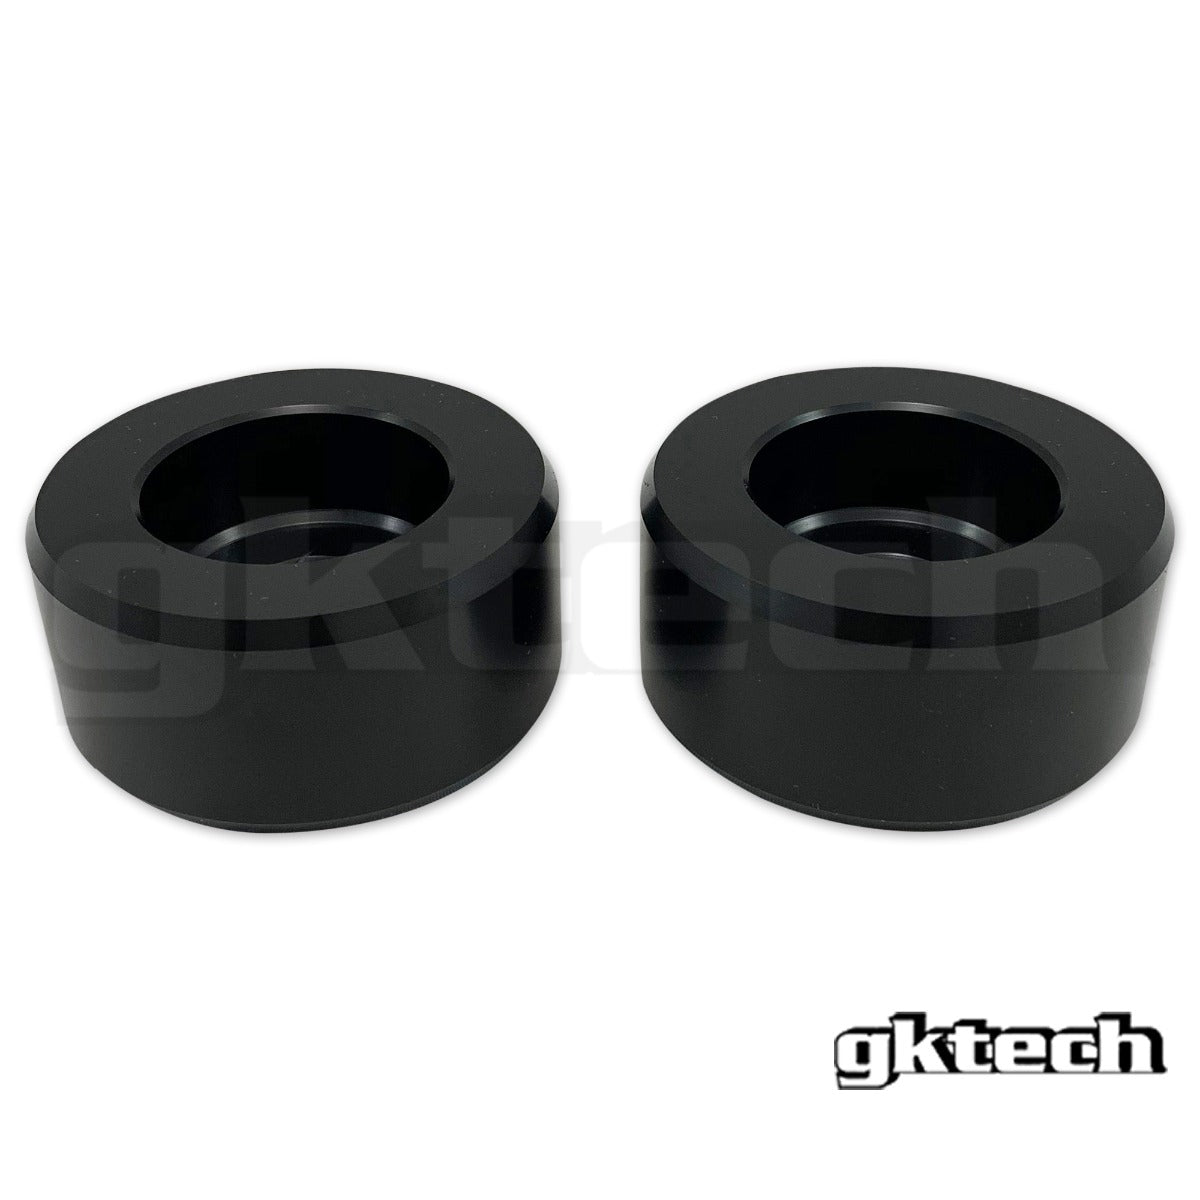 S/R/Z32 chassis Solid diff bushes